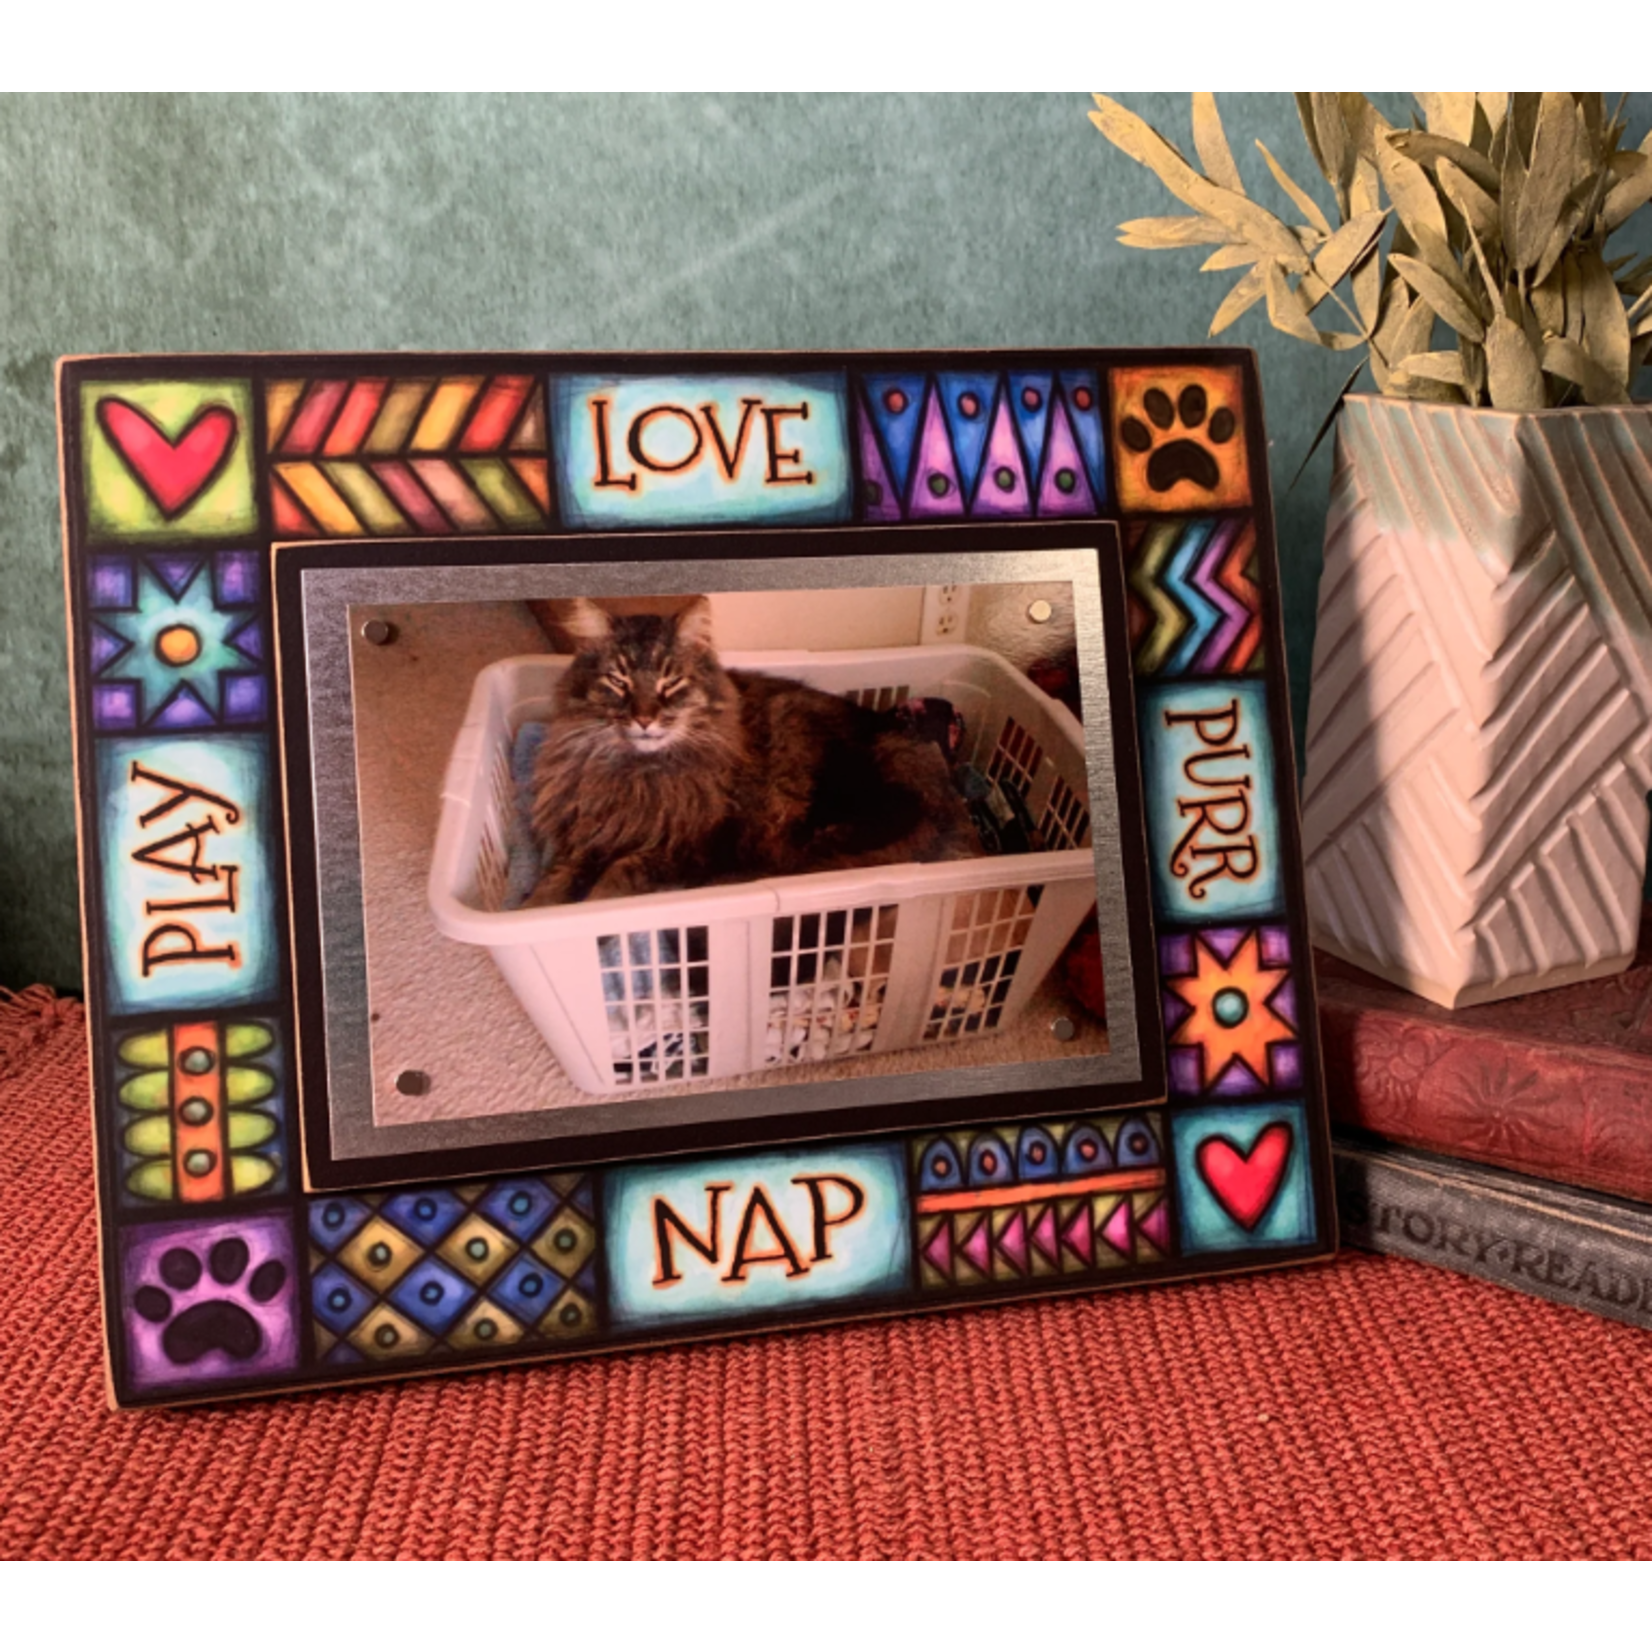 LOVE, PURR, NAP, PLAY - WOOD ART PICTURE FRAME